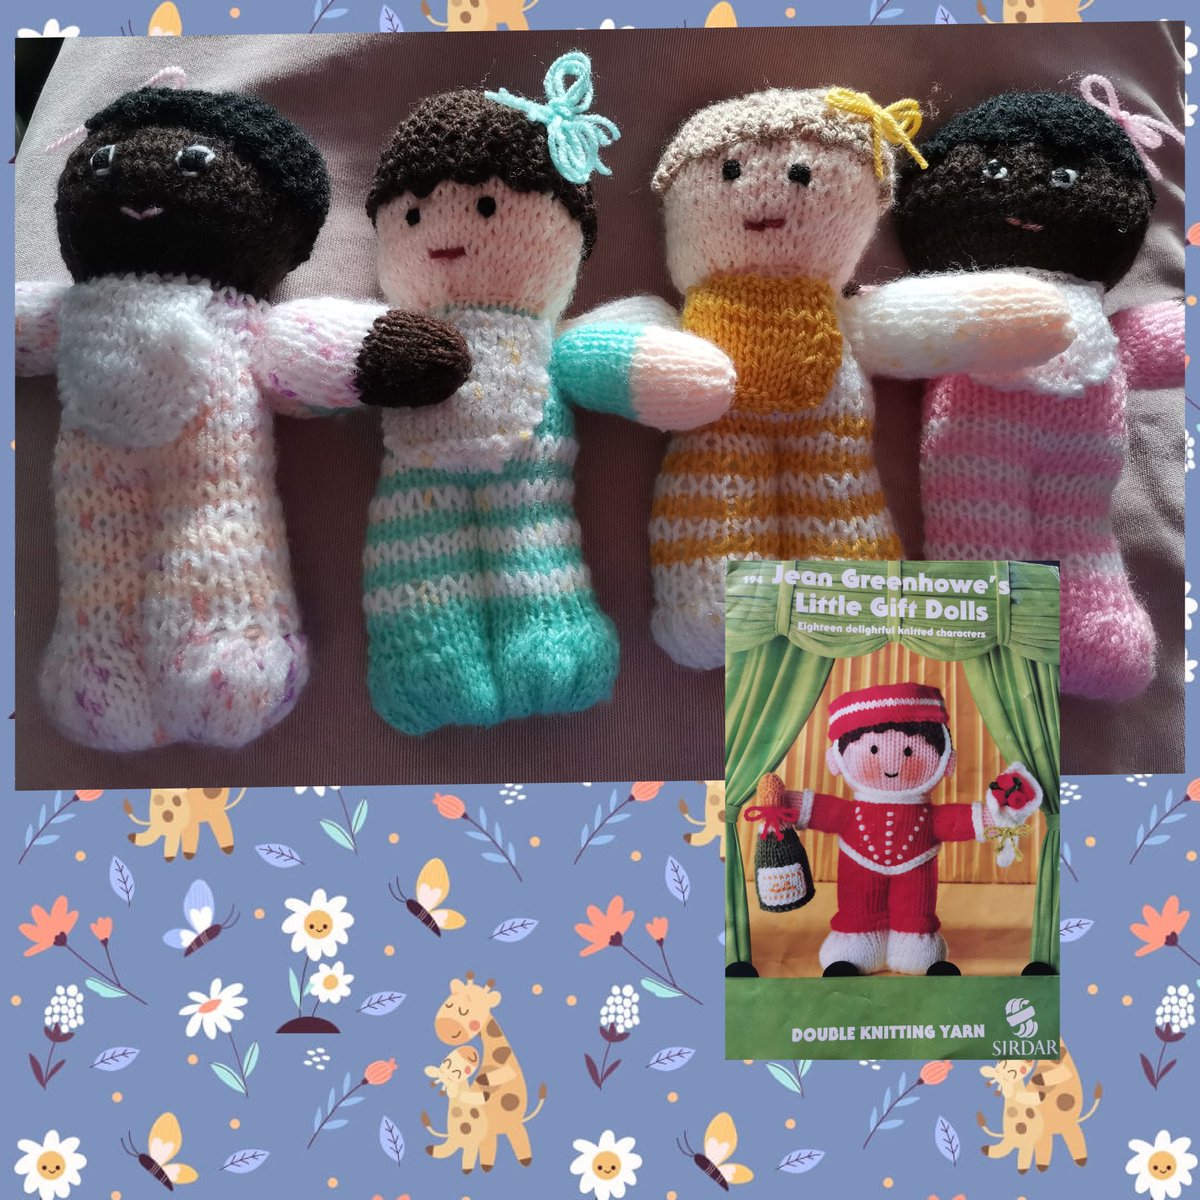 I've enjoyed making 4 baby dolls for our shoeboxes. Pattern can be found in #Jeangreenhowe Little Gift Dolls booklet. #ipackedashoebox @OCC_shoeboxes